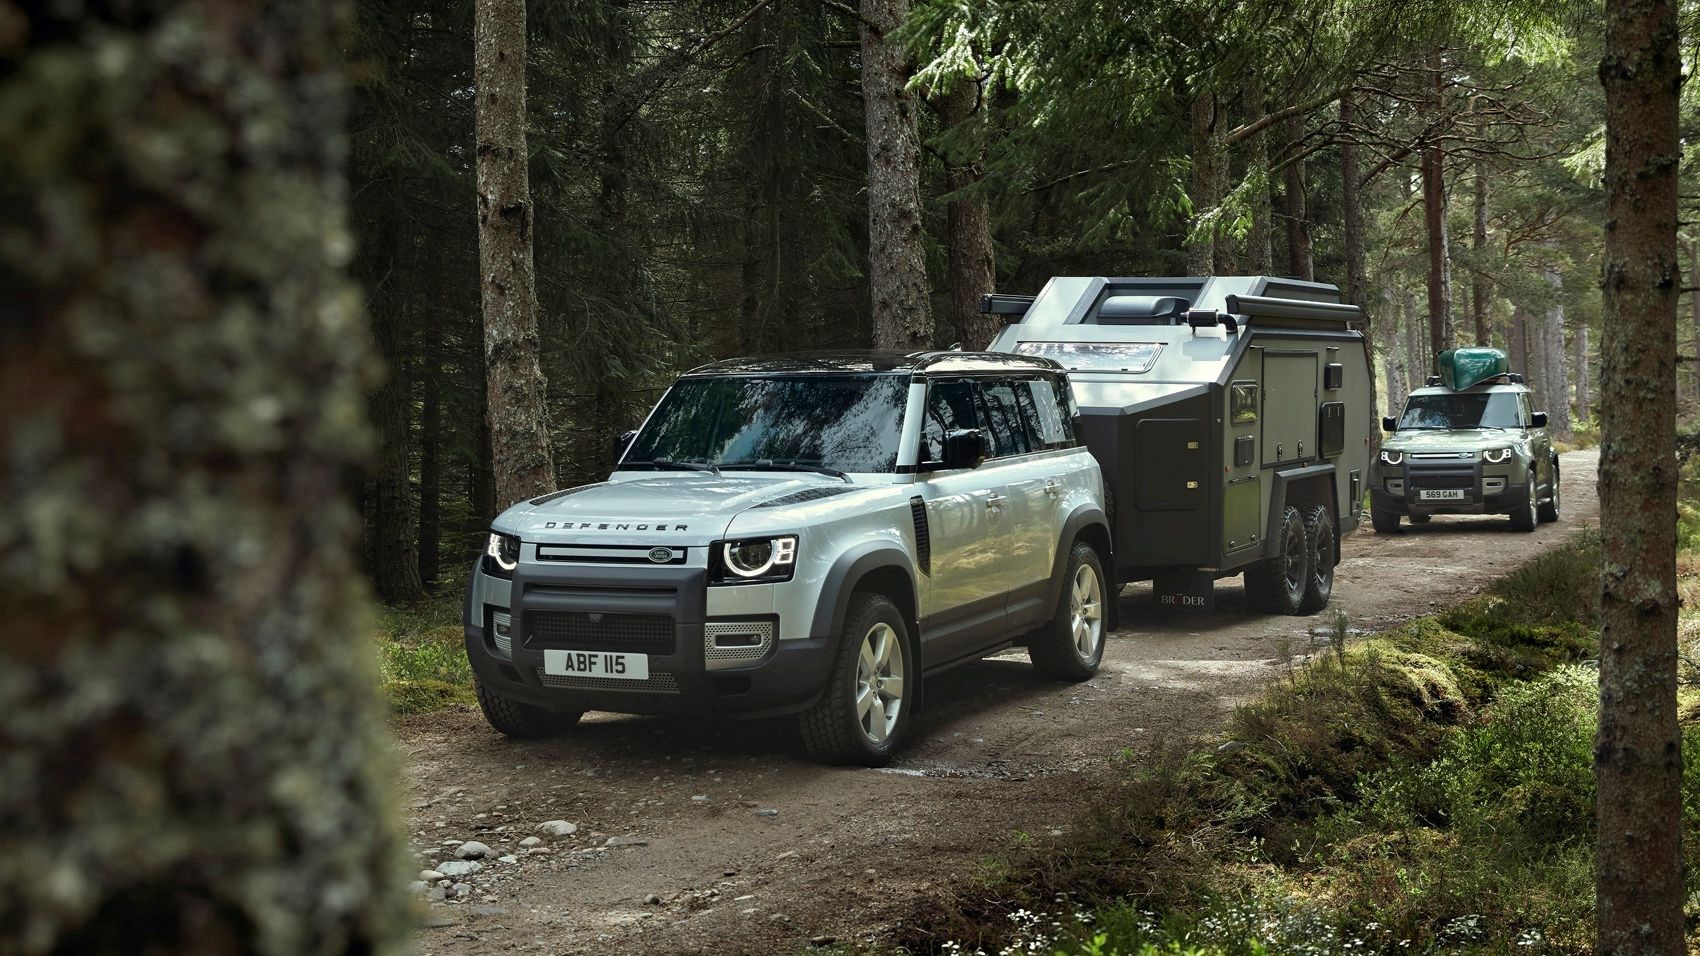 New Land Rover Defender: picture, specs and UK prices